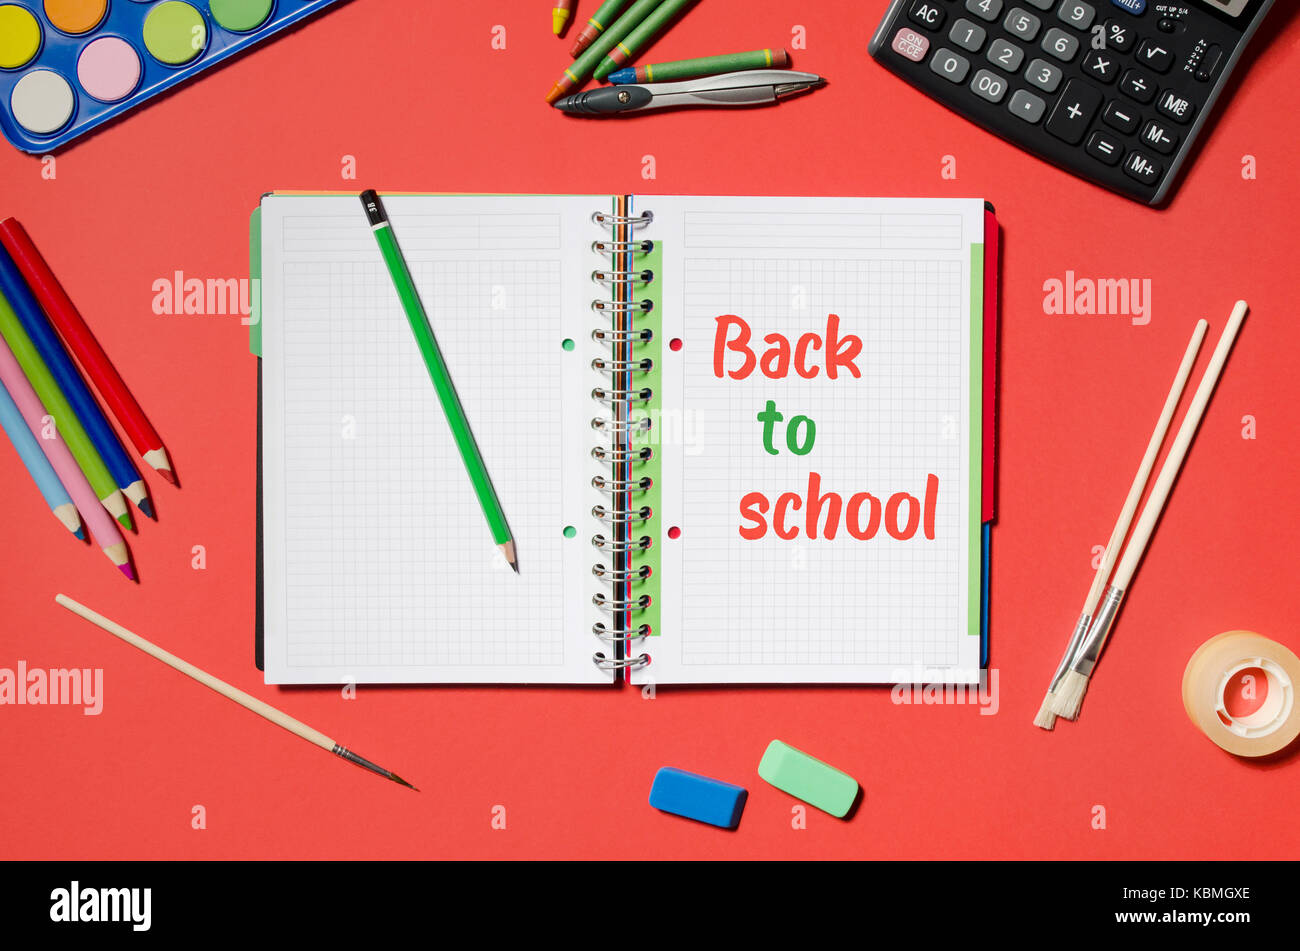 Notepad with back to school words and office stationery, red background.  stationery office desk top view table school student concept Stock Photo